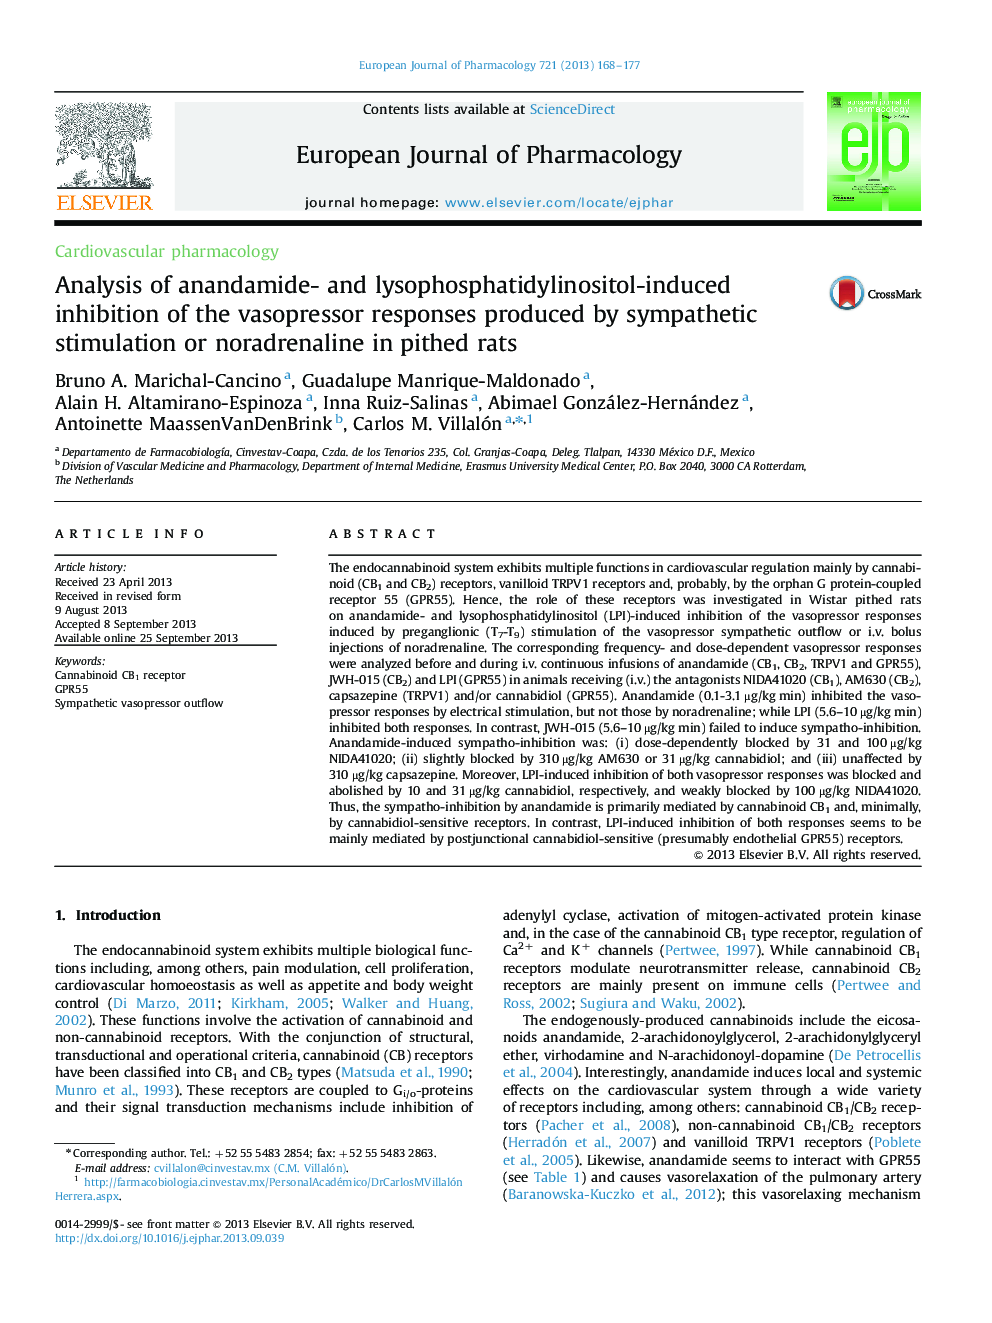 Cardiovascular pharmacologyAnalysis of anandamide- and lysophosphatidylinositol-induced inhibition of the vasopressor responses produced by sympathetic stimulation or noradrenaline in pithed rats